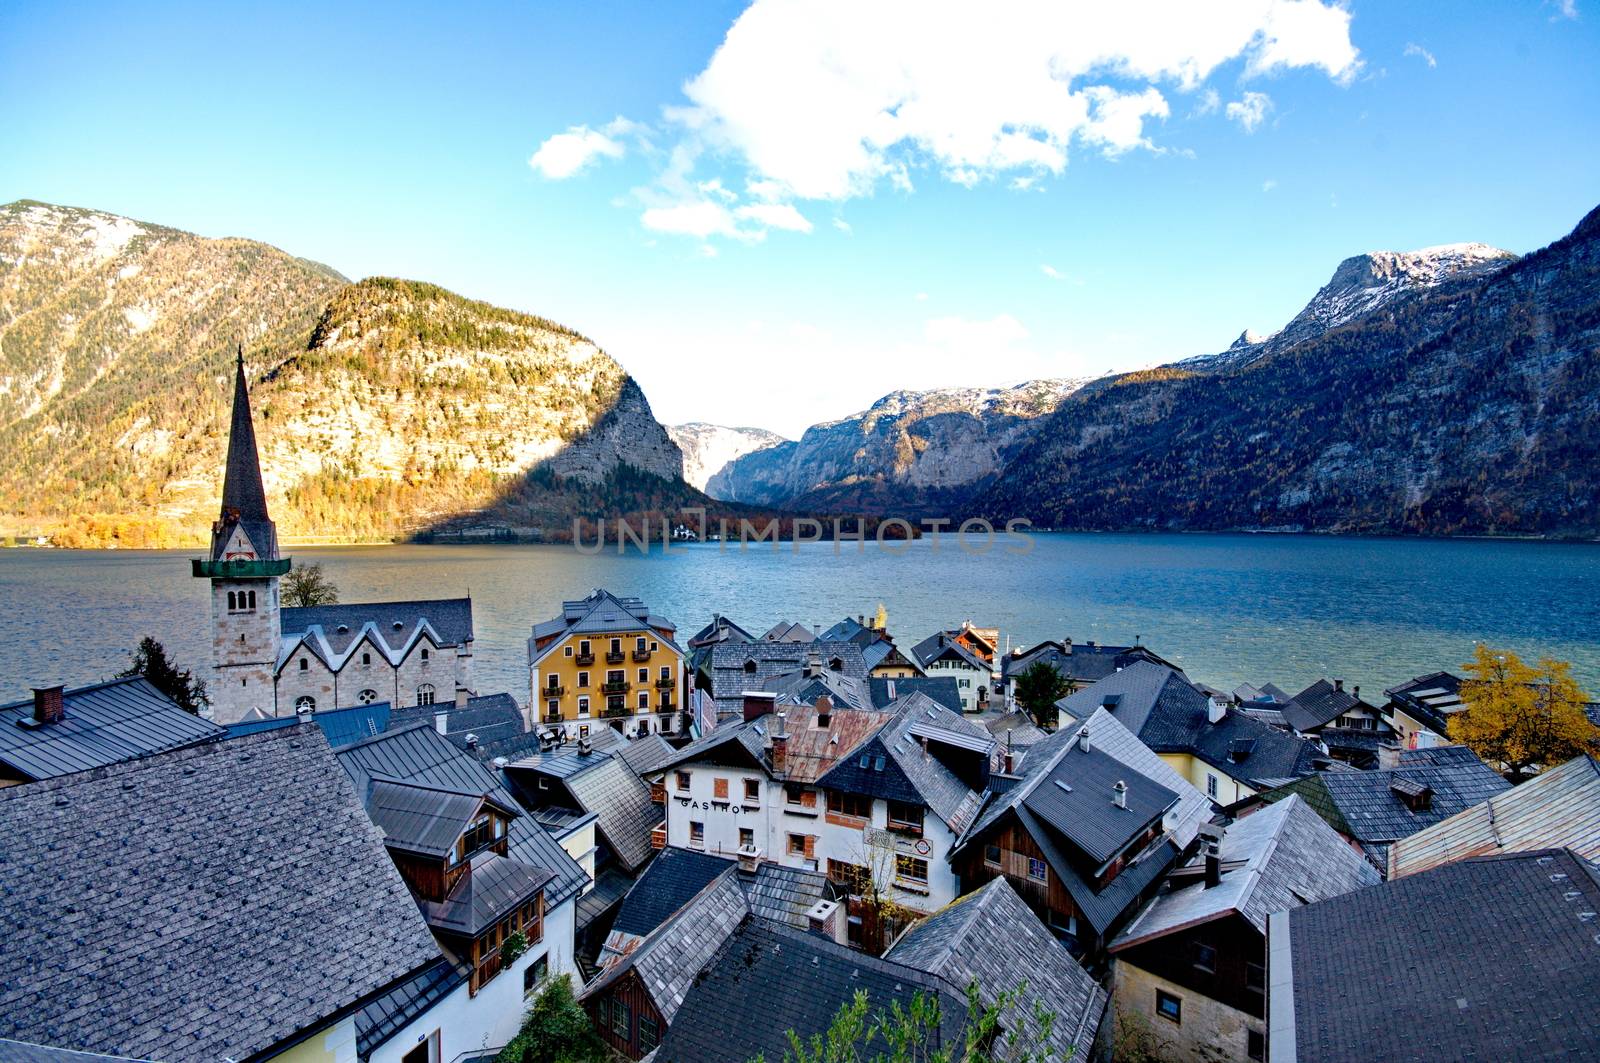 Beautiful village of Hallstatt  on the side of a lake in the Alps in Austria